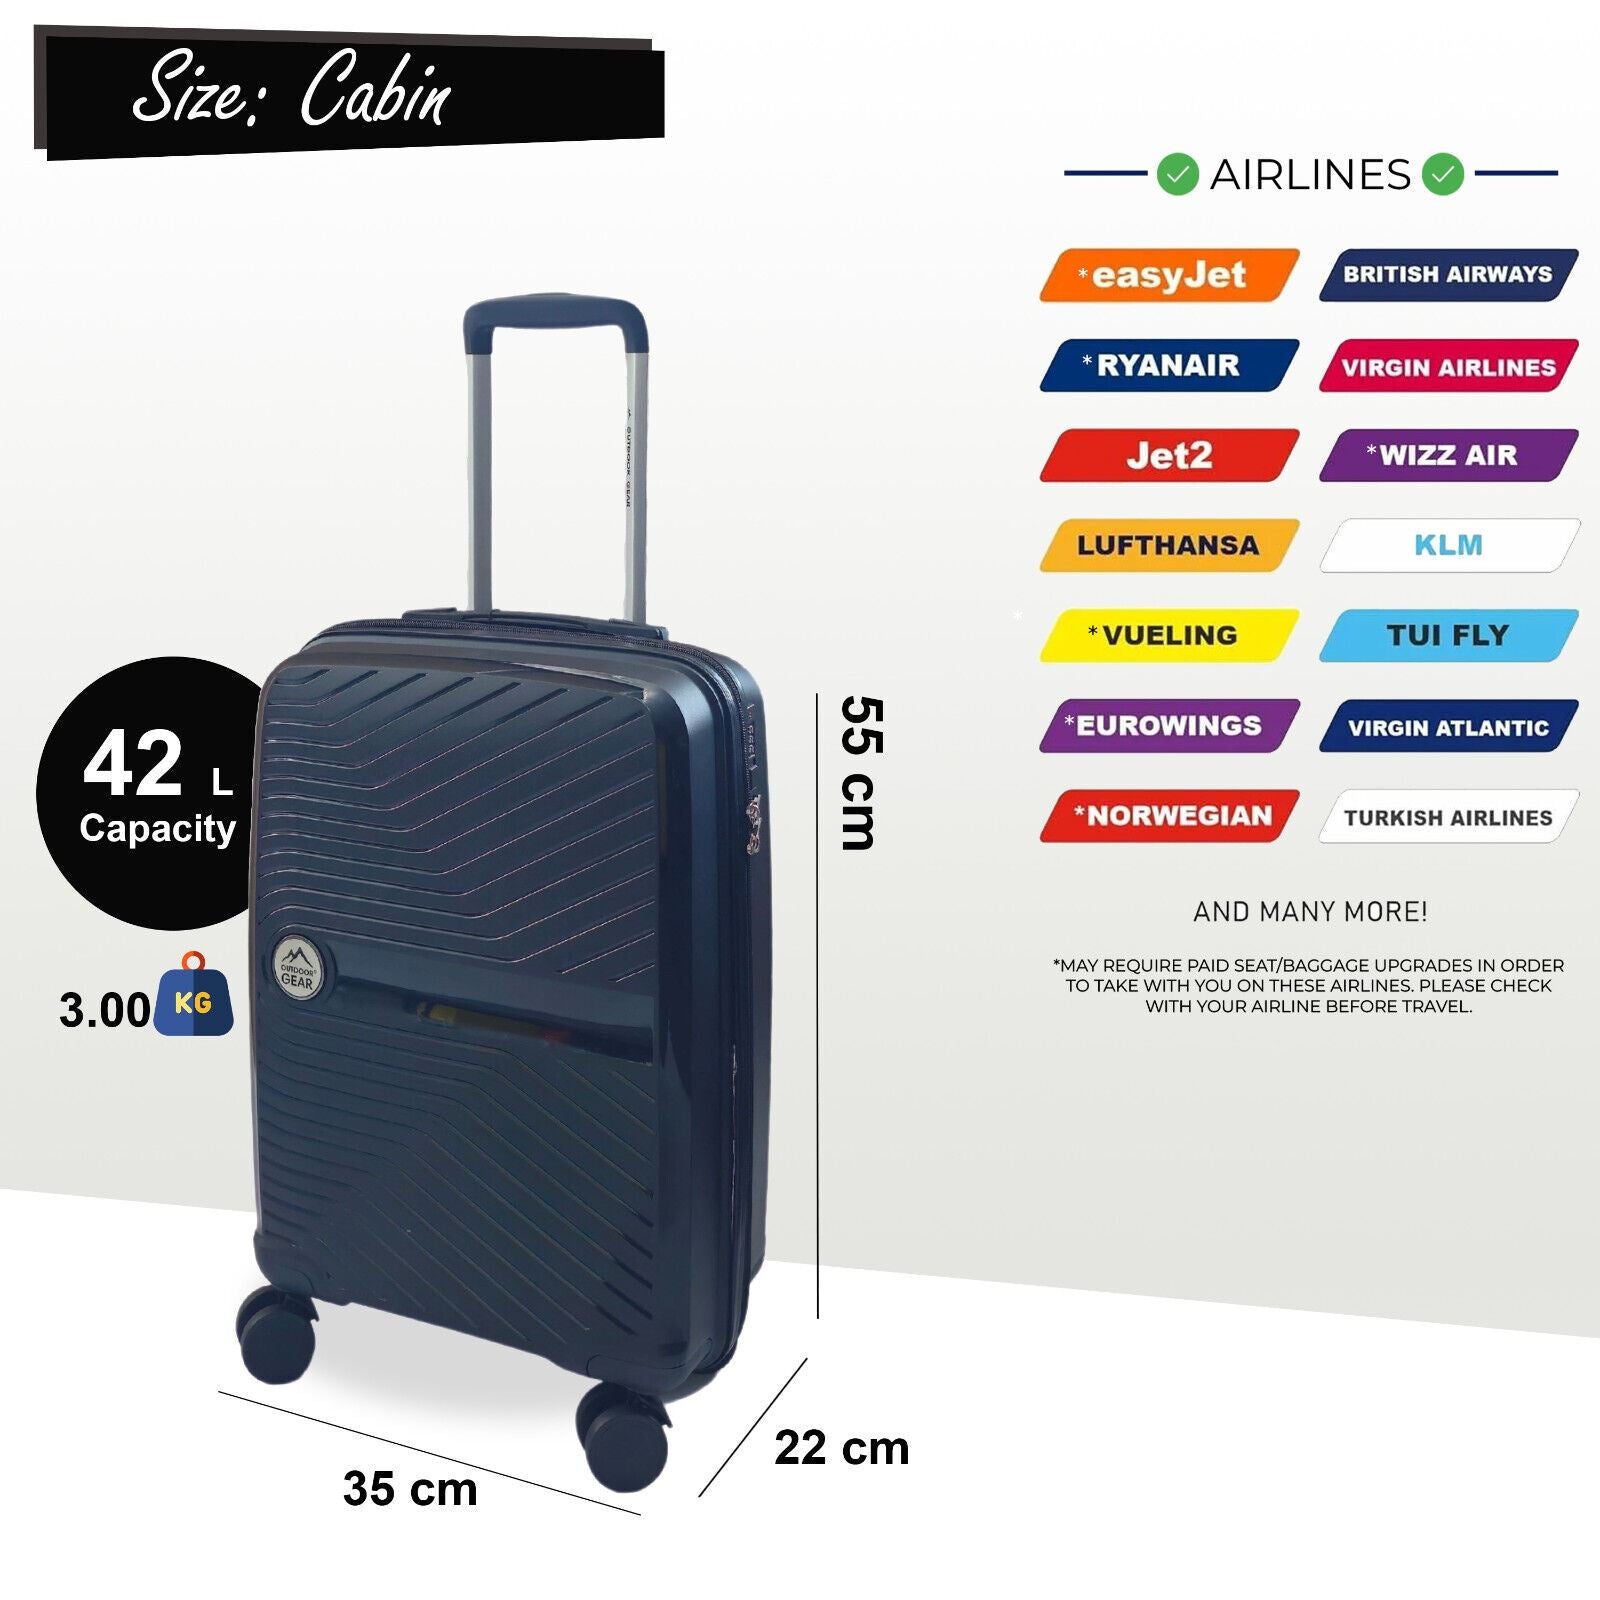 Abbeville Cabin Hard Shell Suitcase in Black